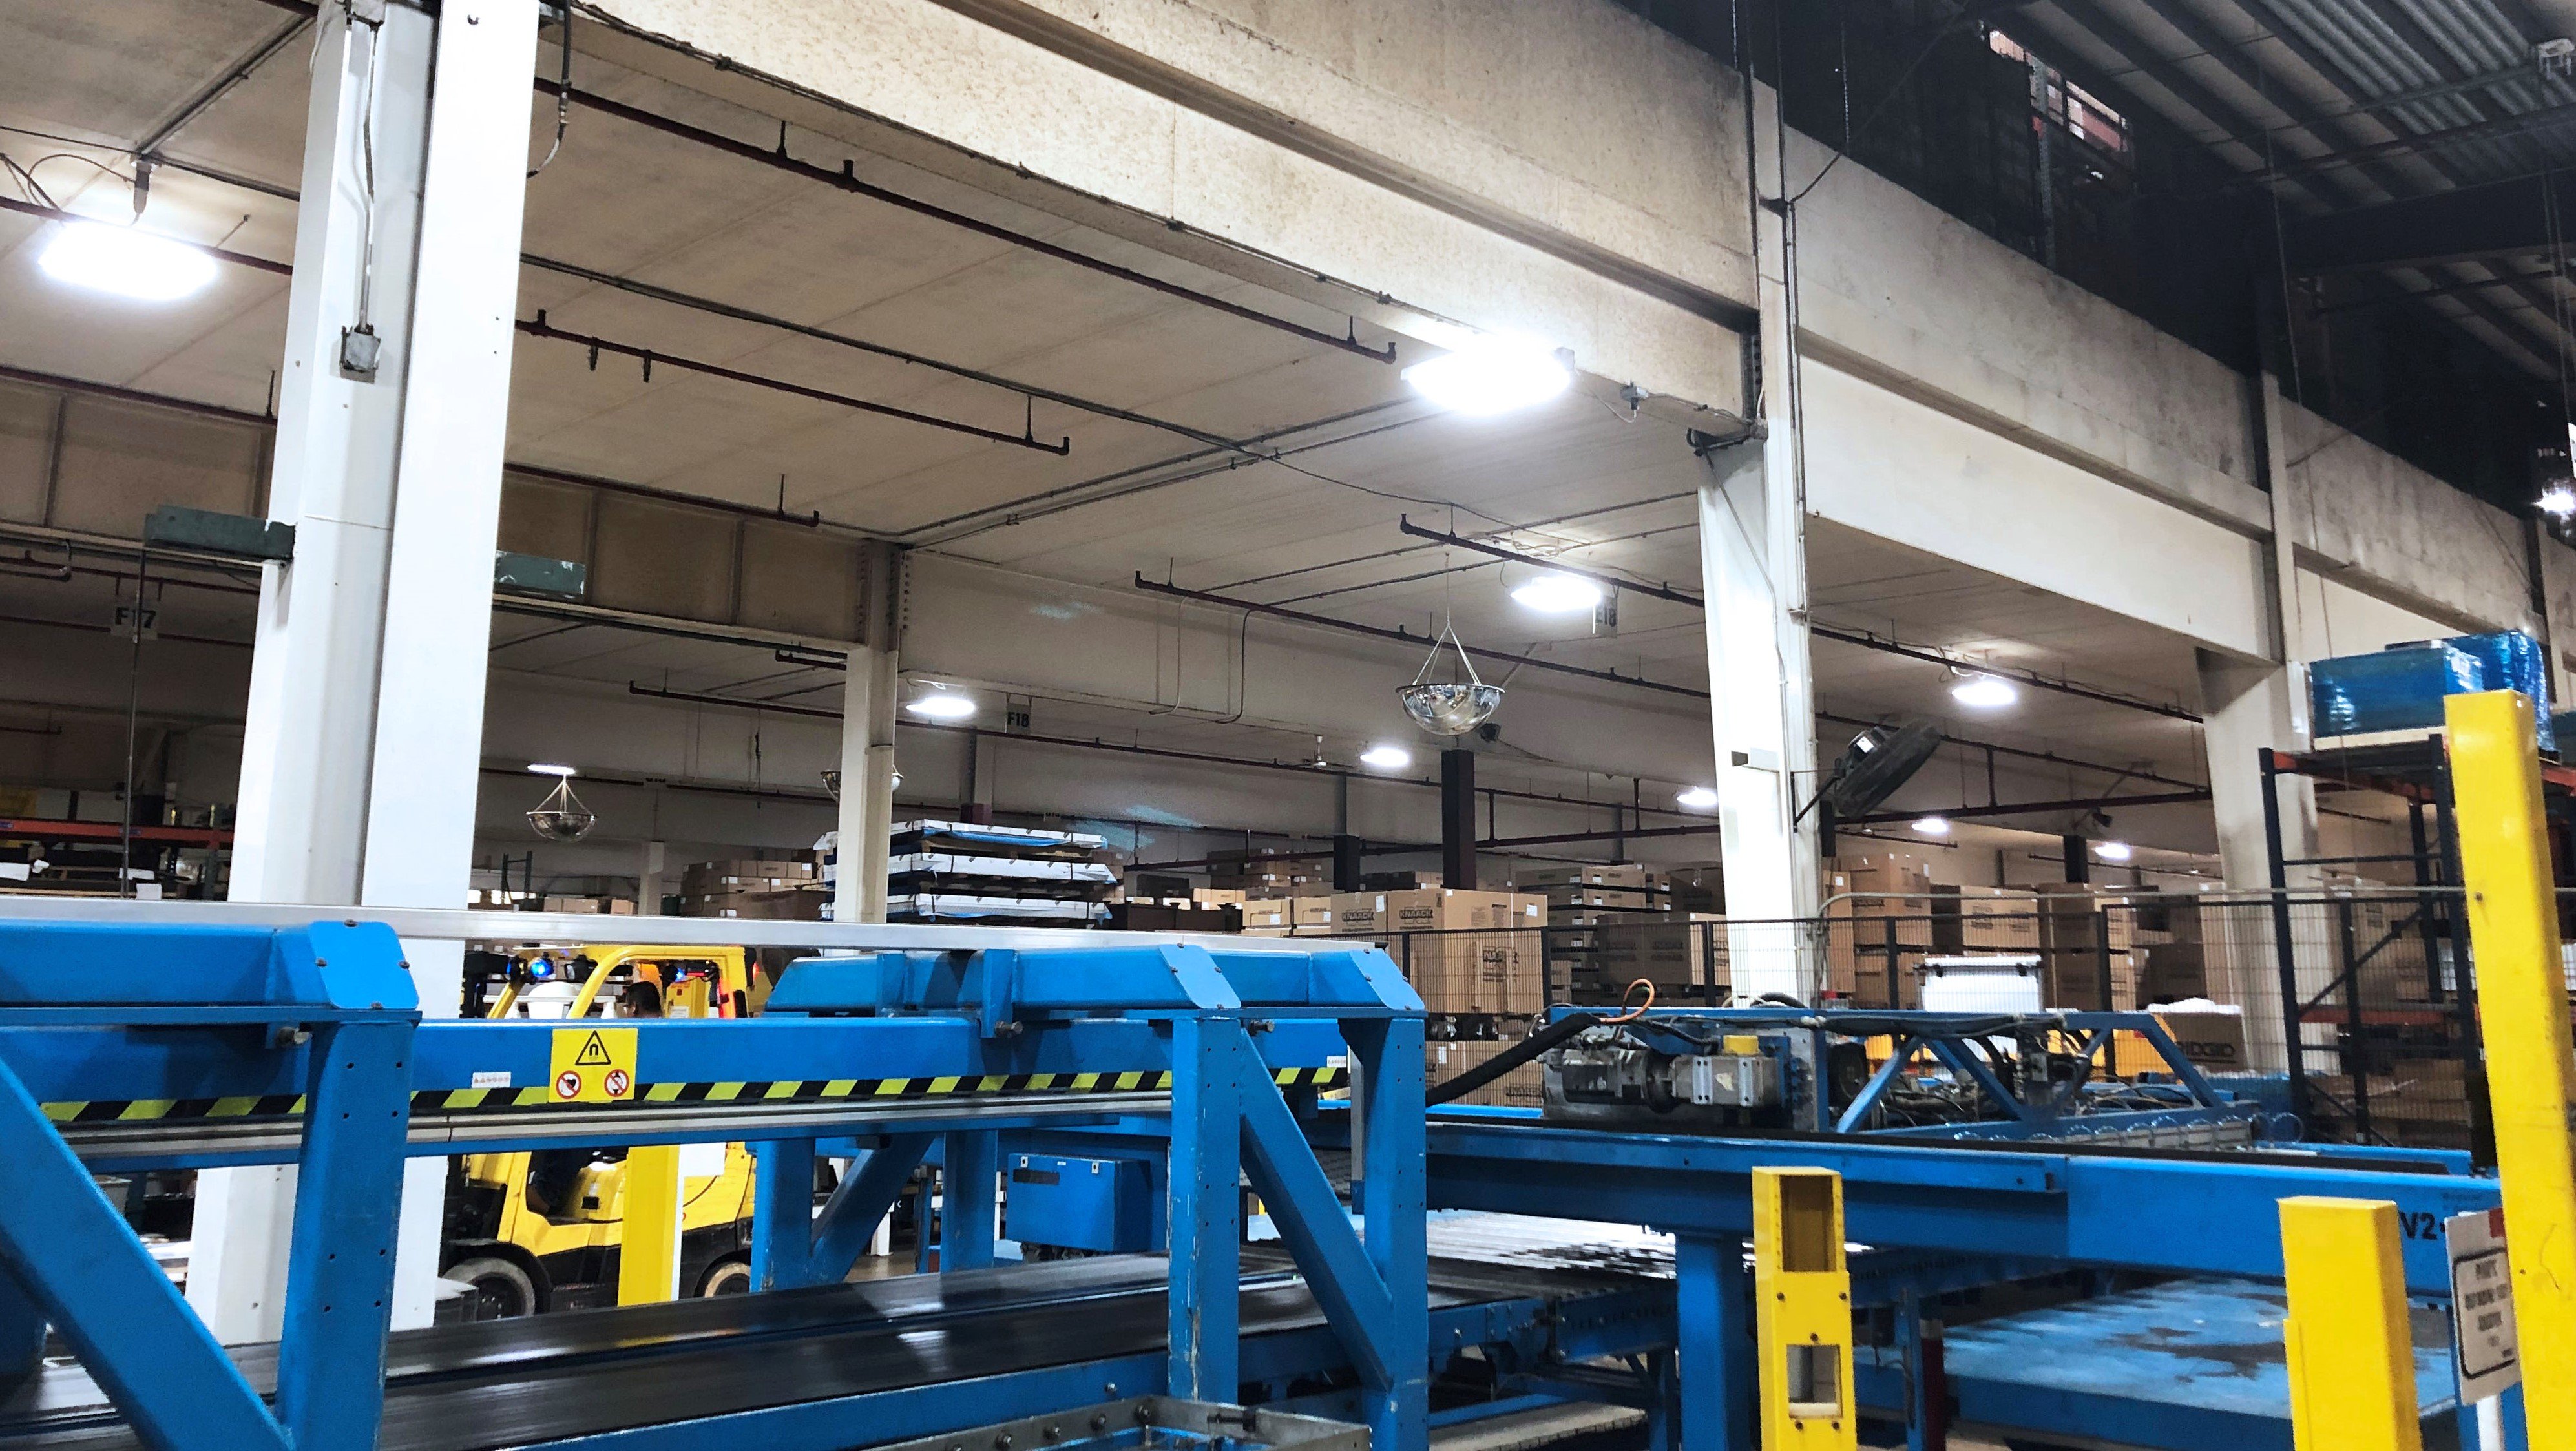 LED lighting project at Werner manufacturing plant in Illinois